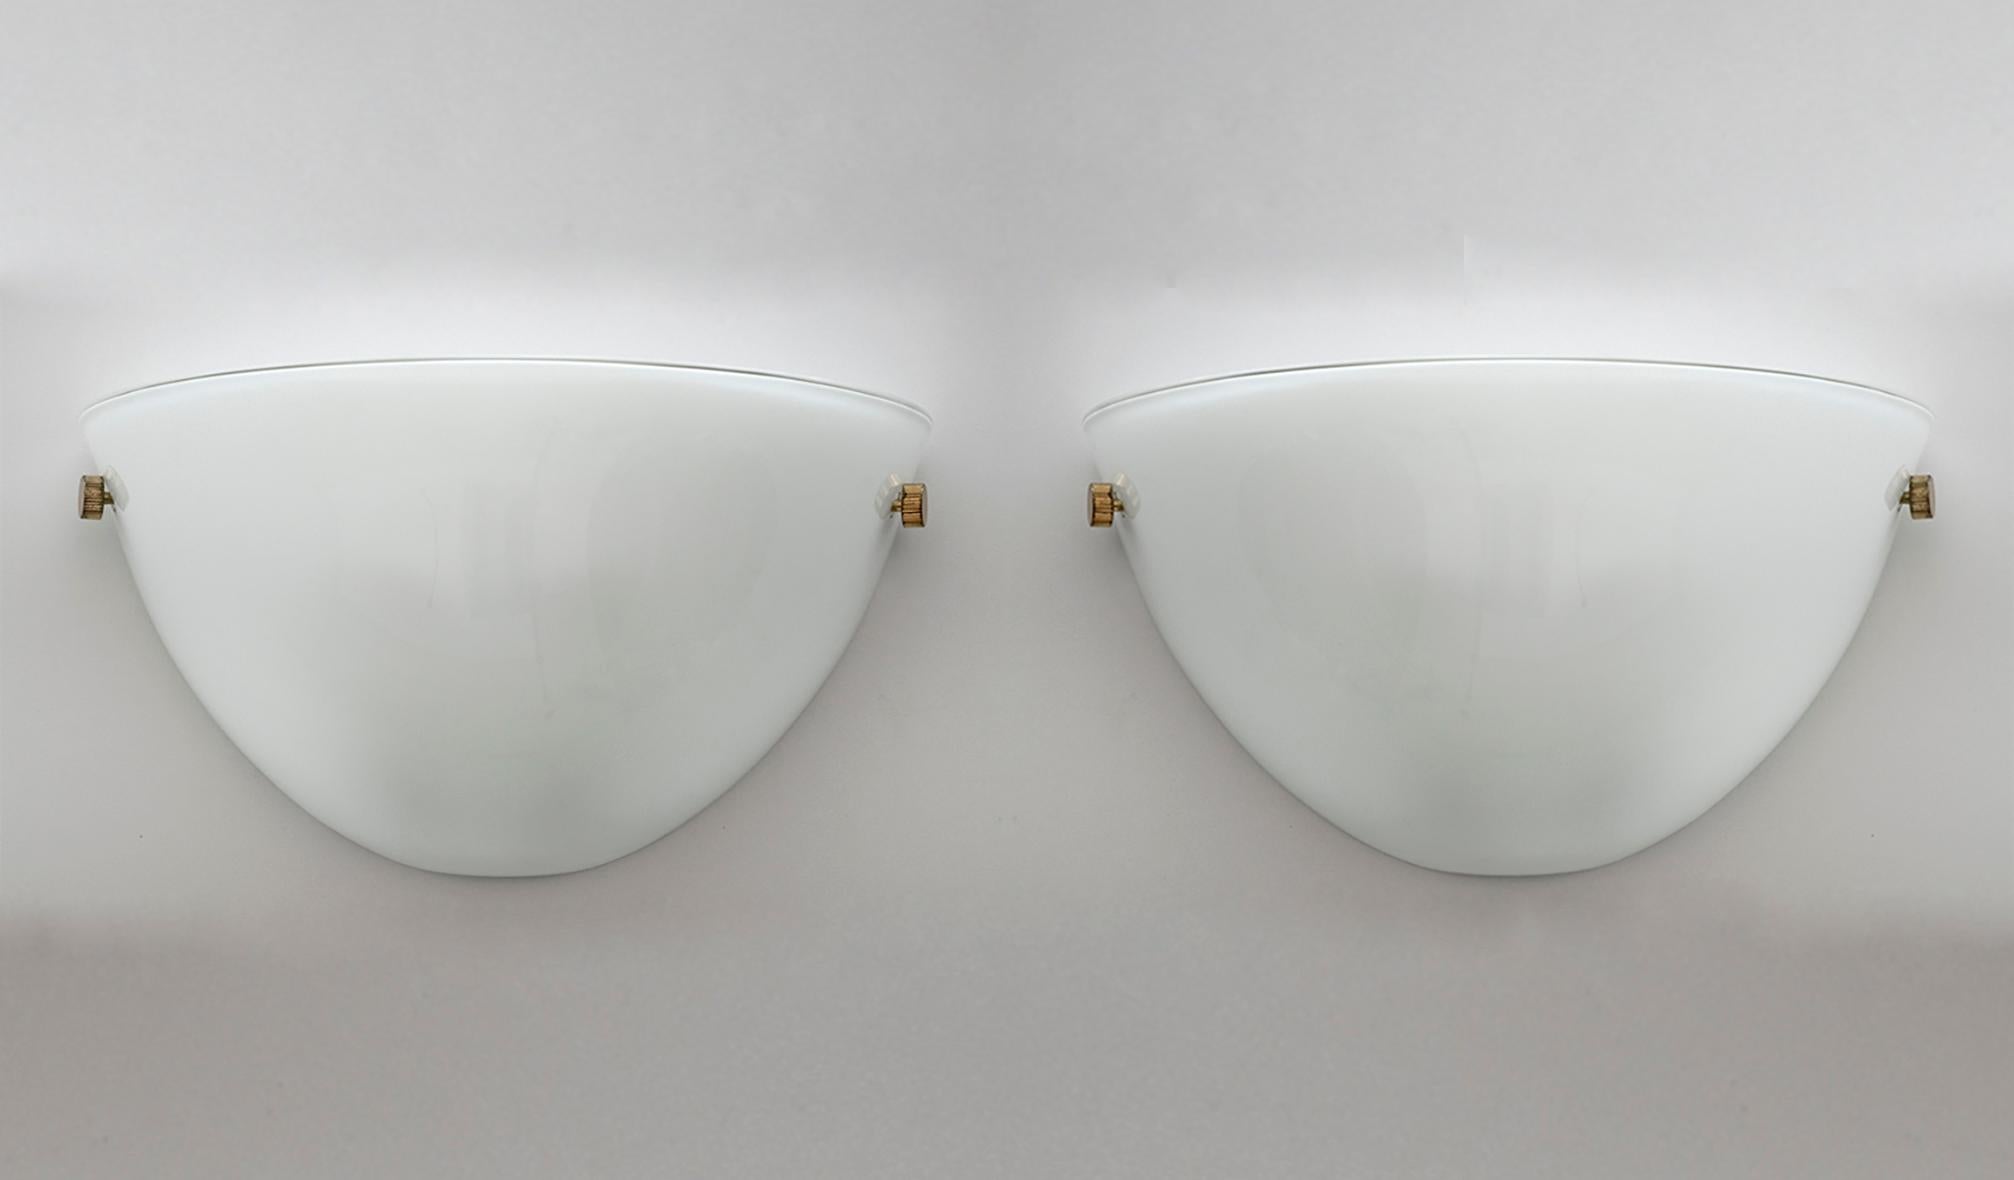 Pair of wall lamps in Incamiciato Murano glass, Zonca production.